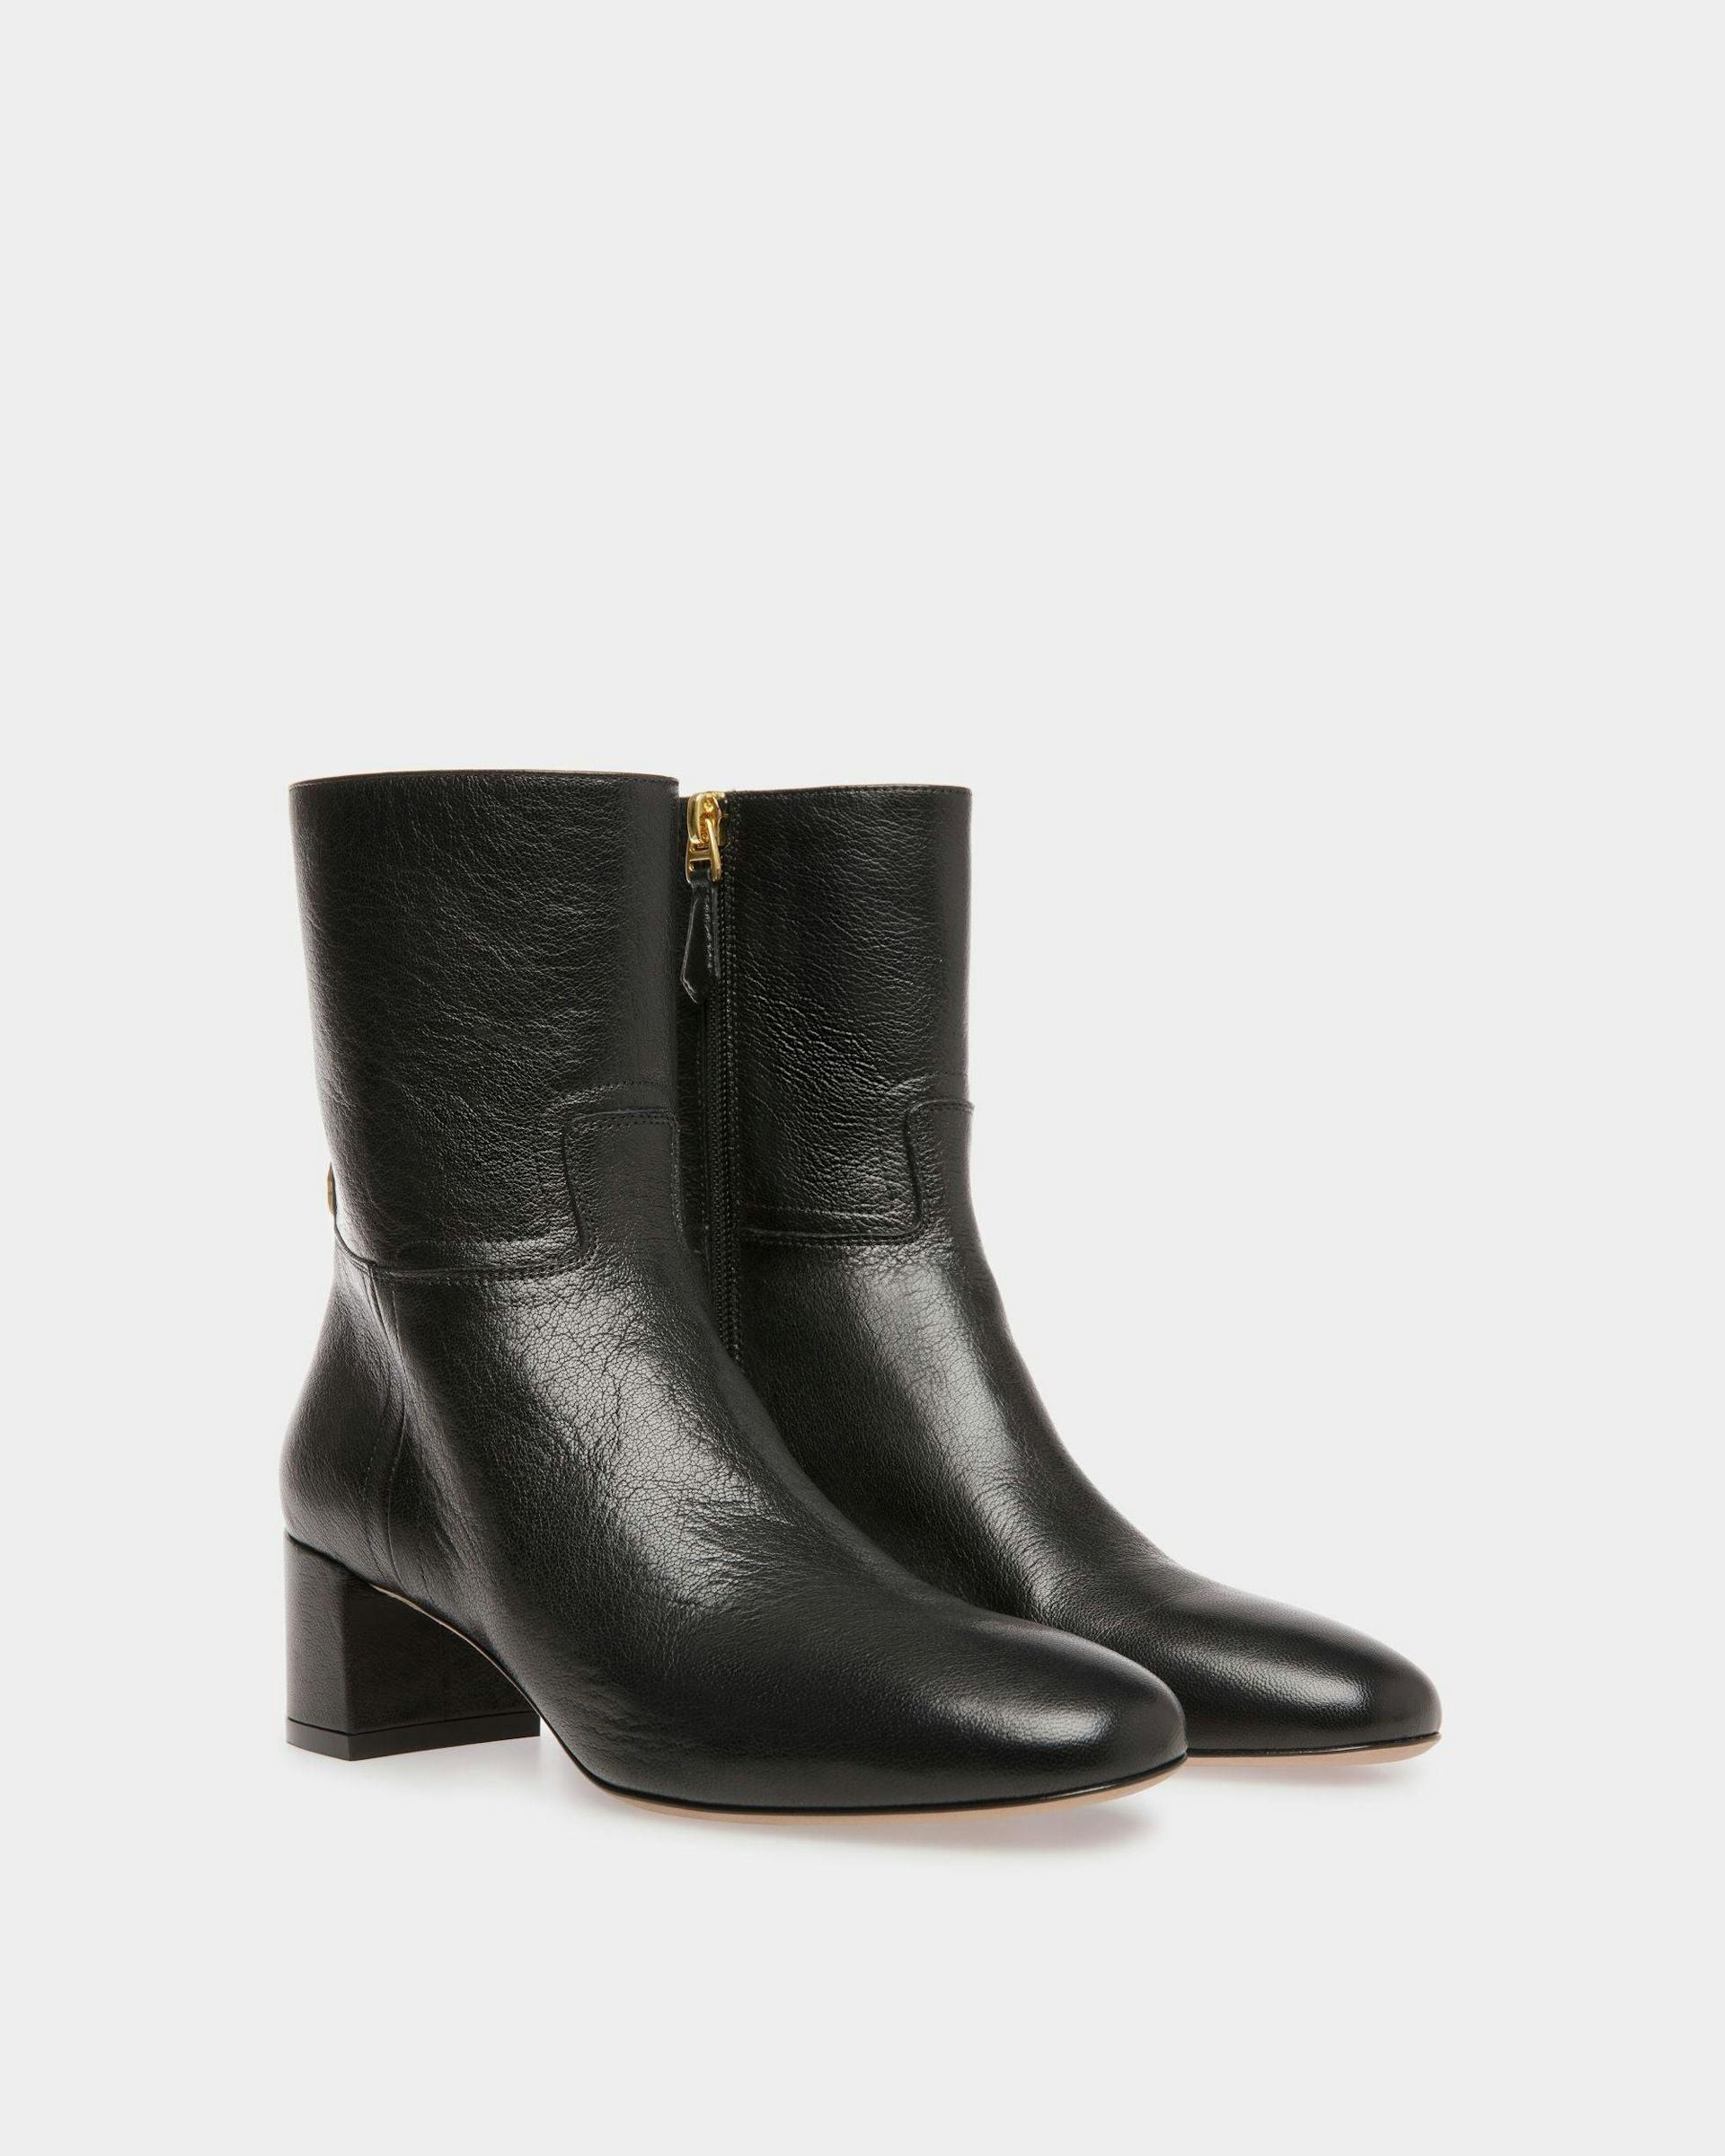 Women's Daily Emblem Booties In Black Leather | Bally | Still Life 3/4 Front